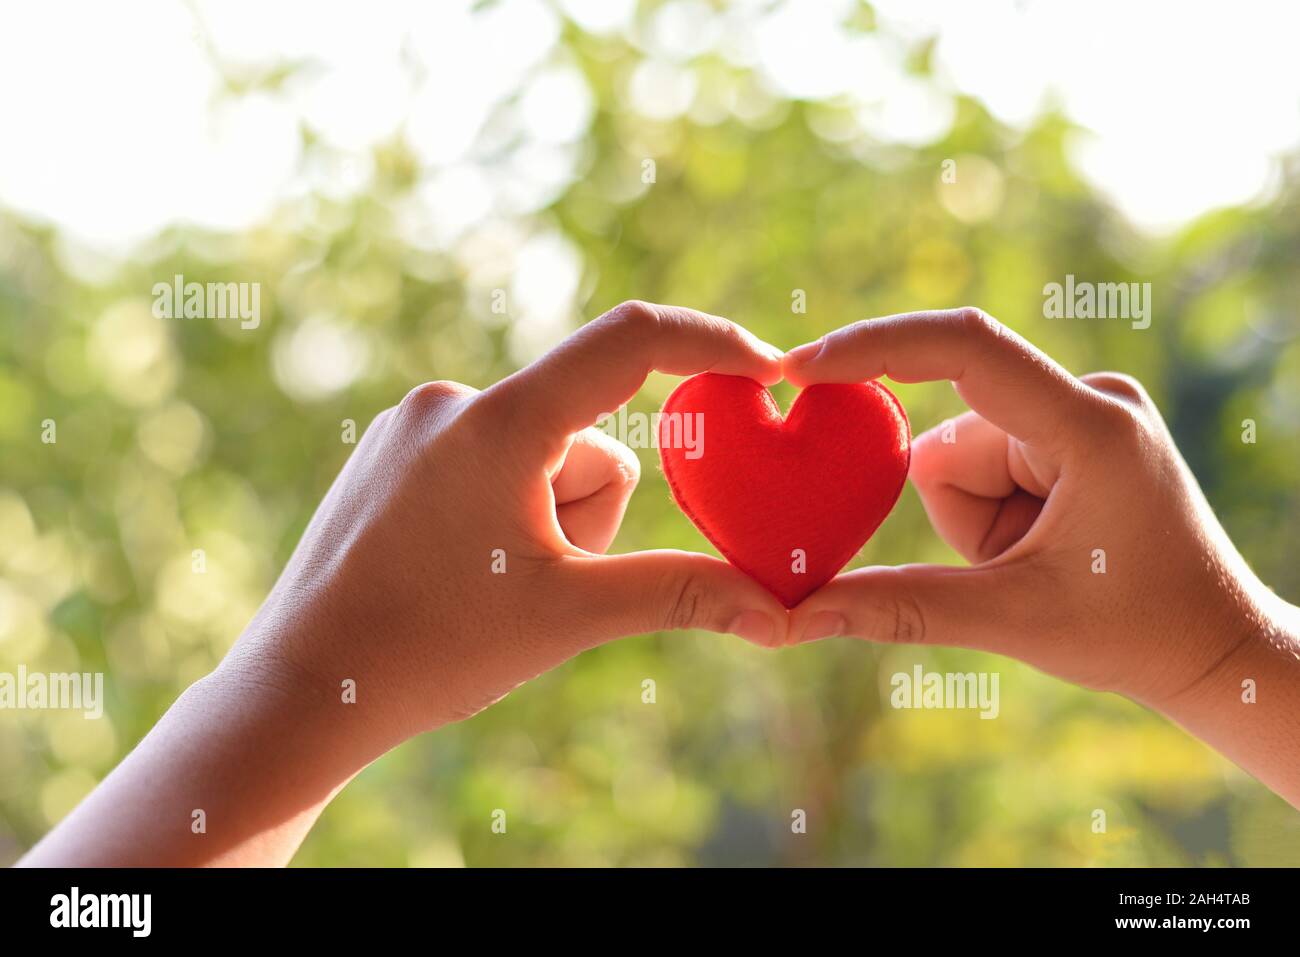 Heart In Hand For Philanthropy Concept Woman Holding Red Heart In Hands For Valentines Day Or Donate Help Give Love Warmth Take Care Stock Photo Alamy